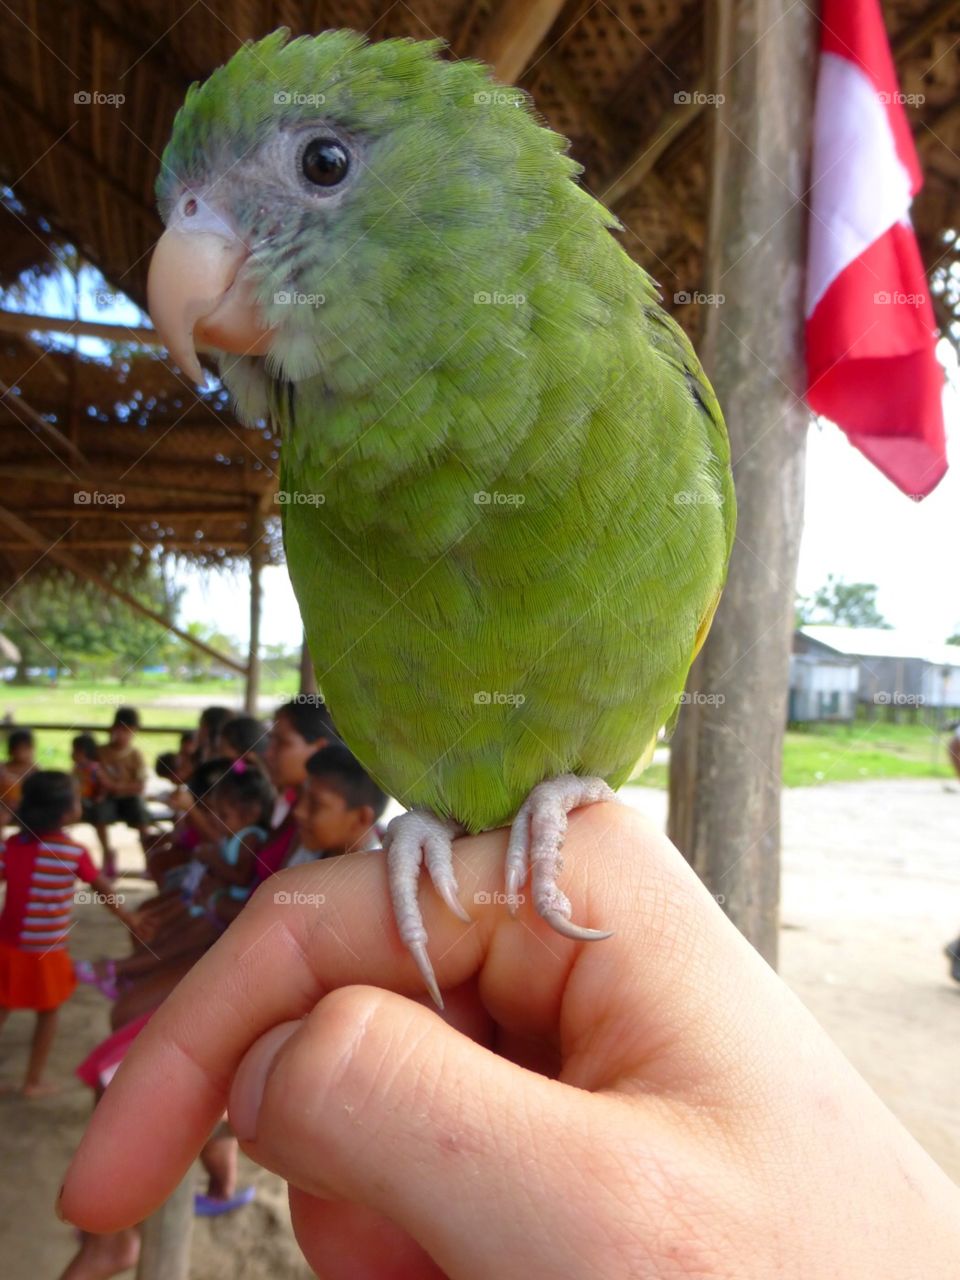 Green parrot held by tourist in Peru 